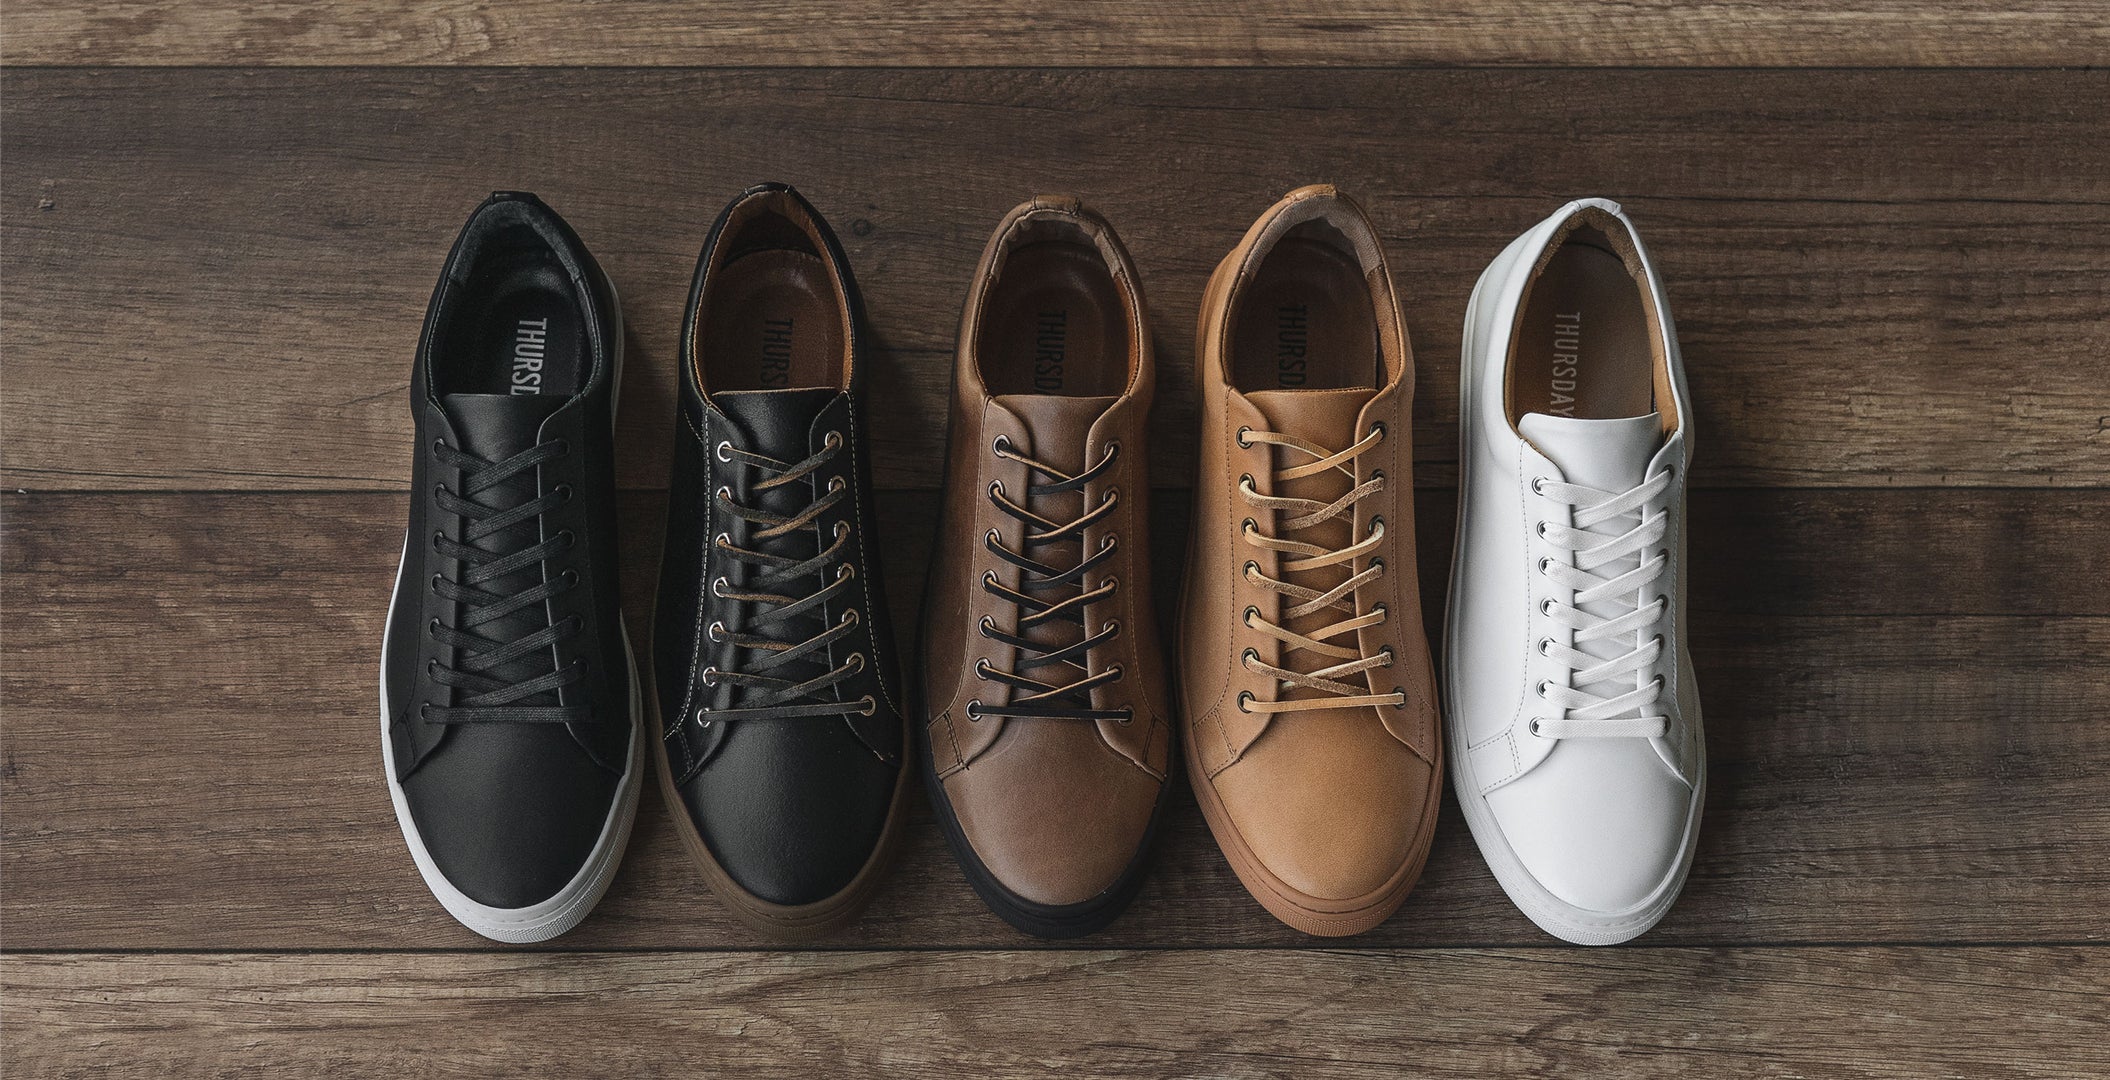 Men's Leather Sneakers to Buy in 2022 - Thursday Boot